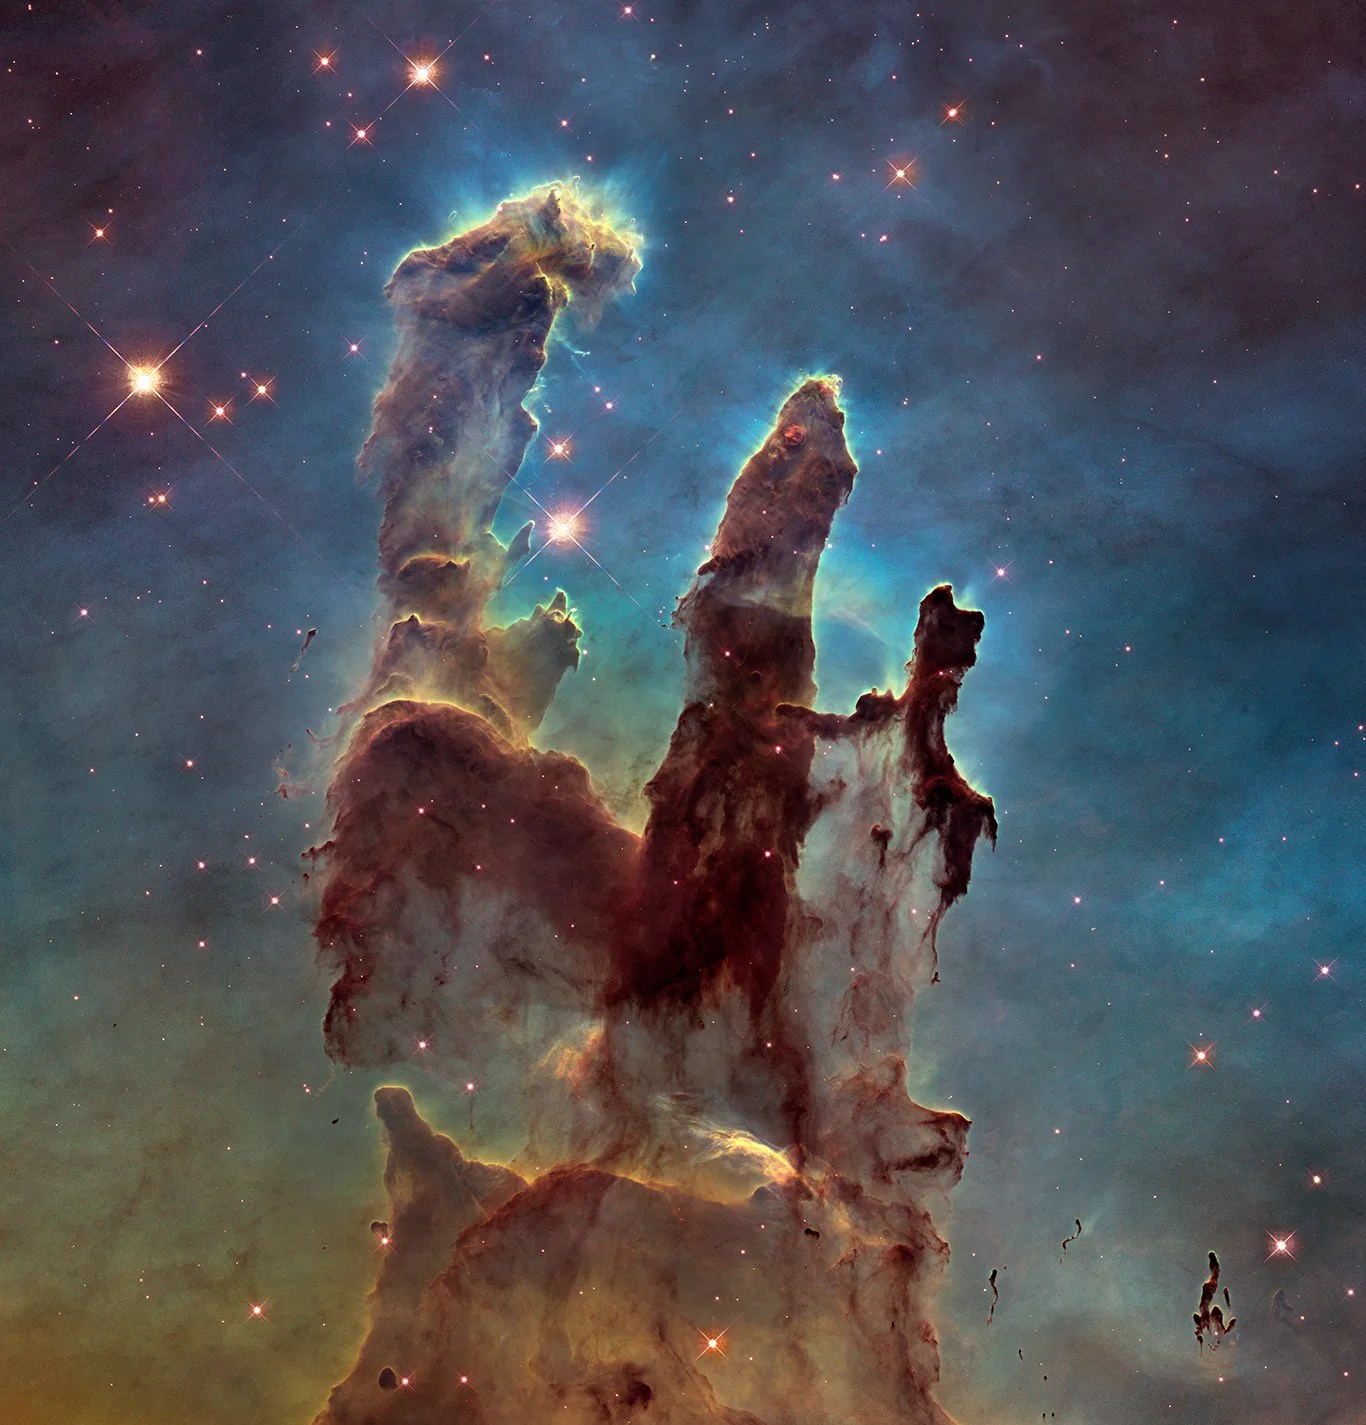 The famous Pillars of Creation revealed by the Hubble Space Telescope.